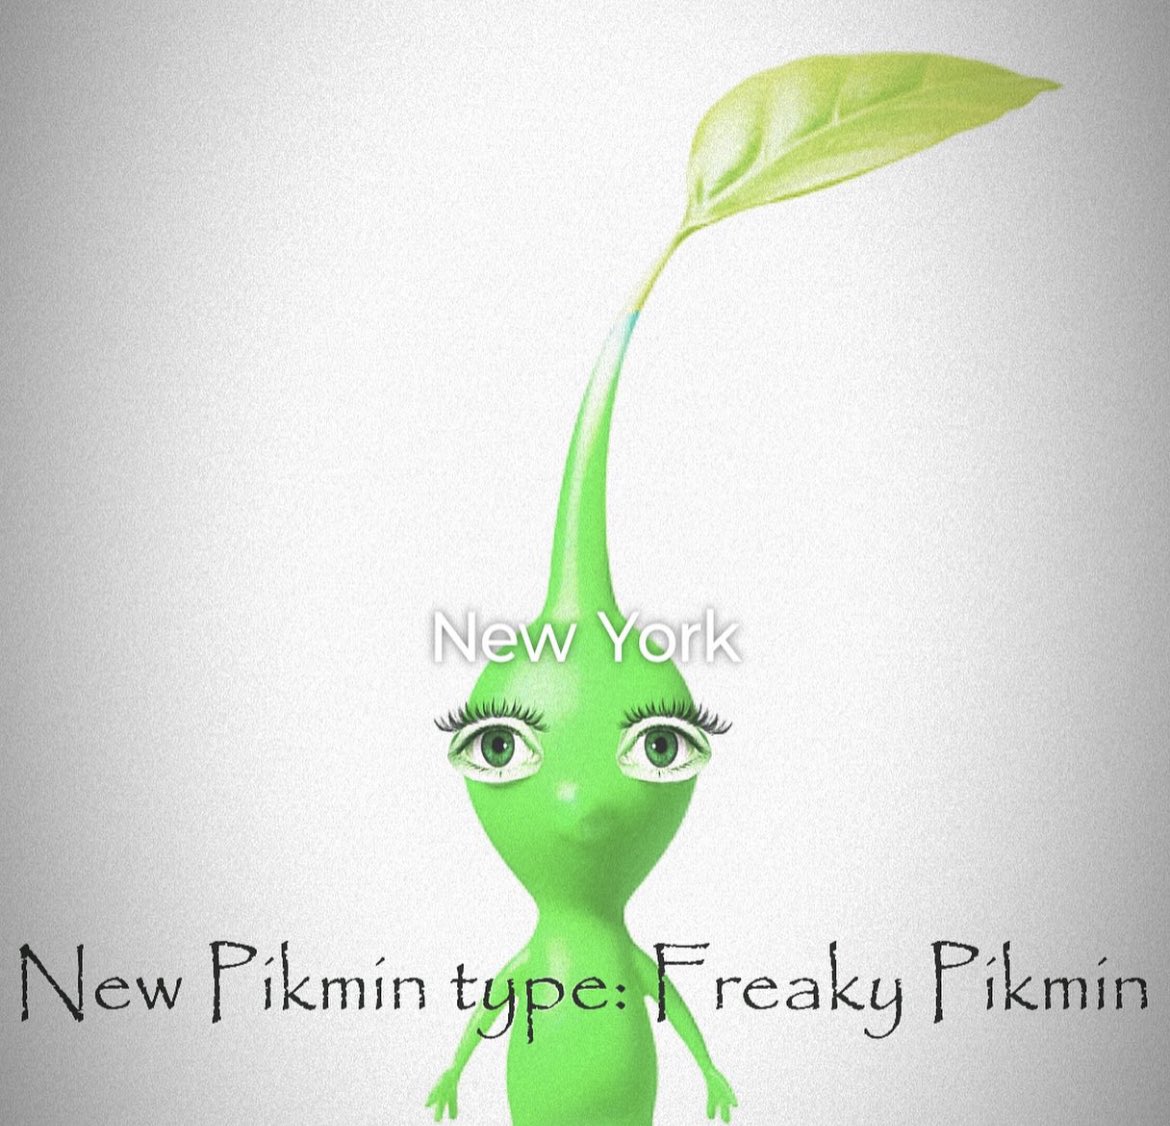 so i run a pikmin memepage exclusively on instagram and i have one other person co-admining it for me because i dont use IG
and of course they do their own thing in order go boost our account numbers

i open the app after god knows how long and this is the first thing i see